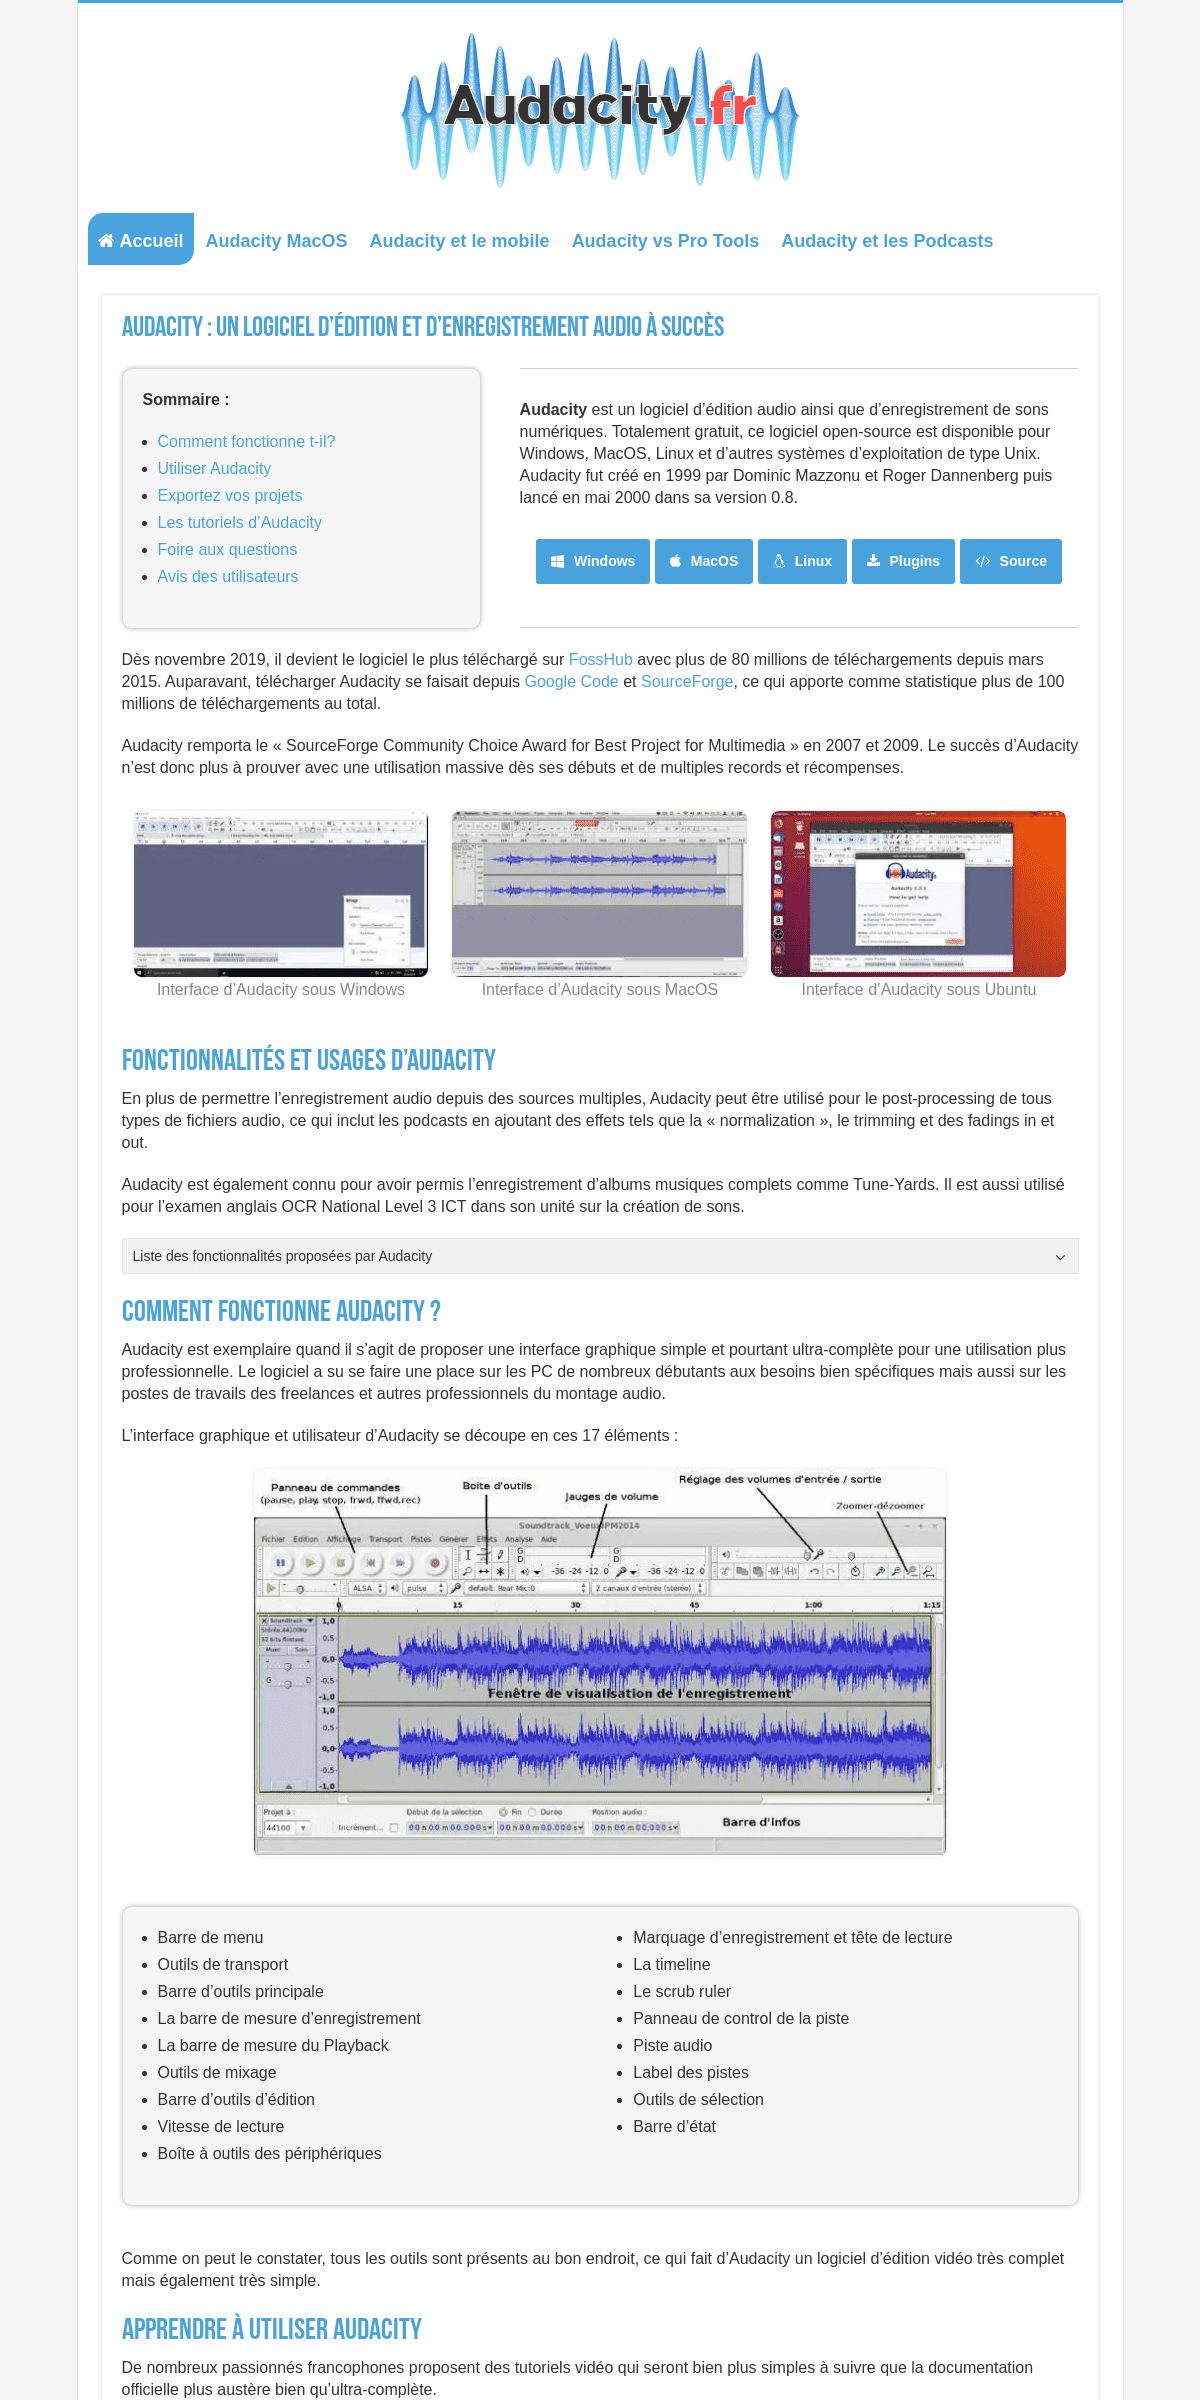 A complete backup of audacity.fr